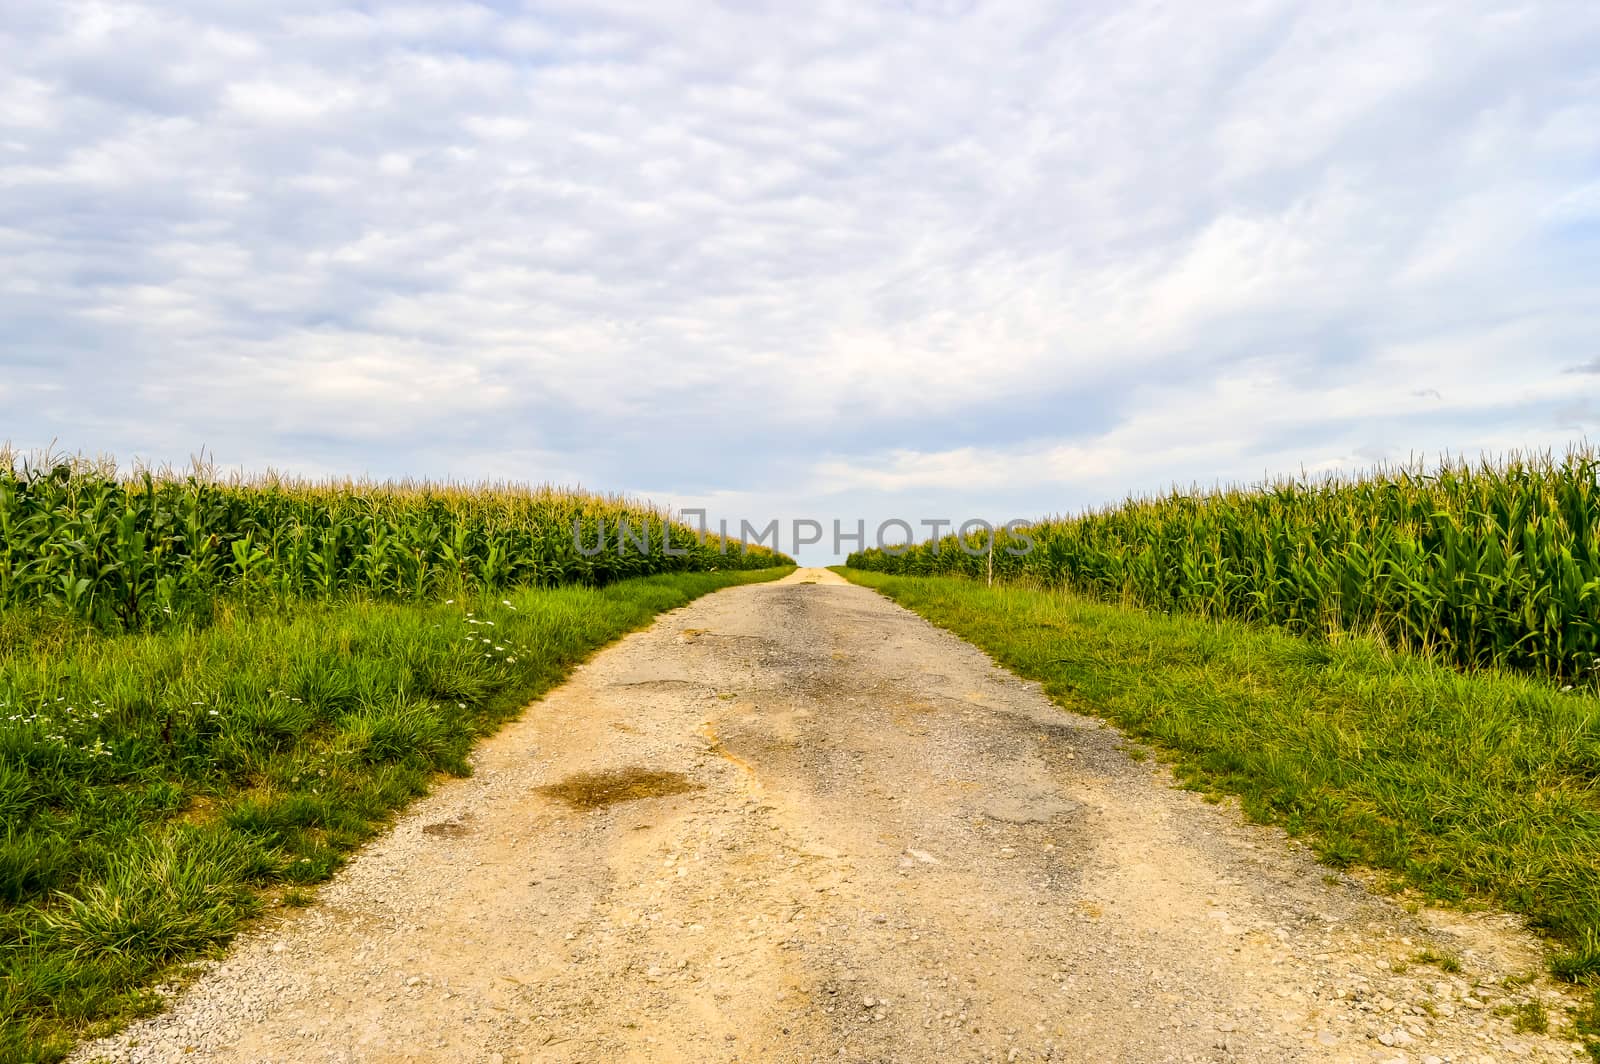 Path between corn fields  by Philou1000